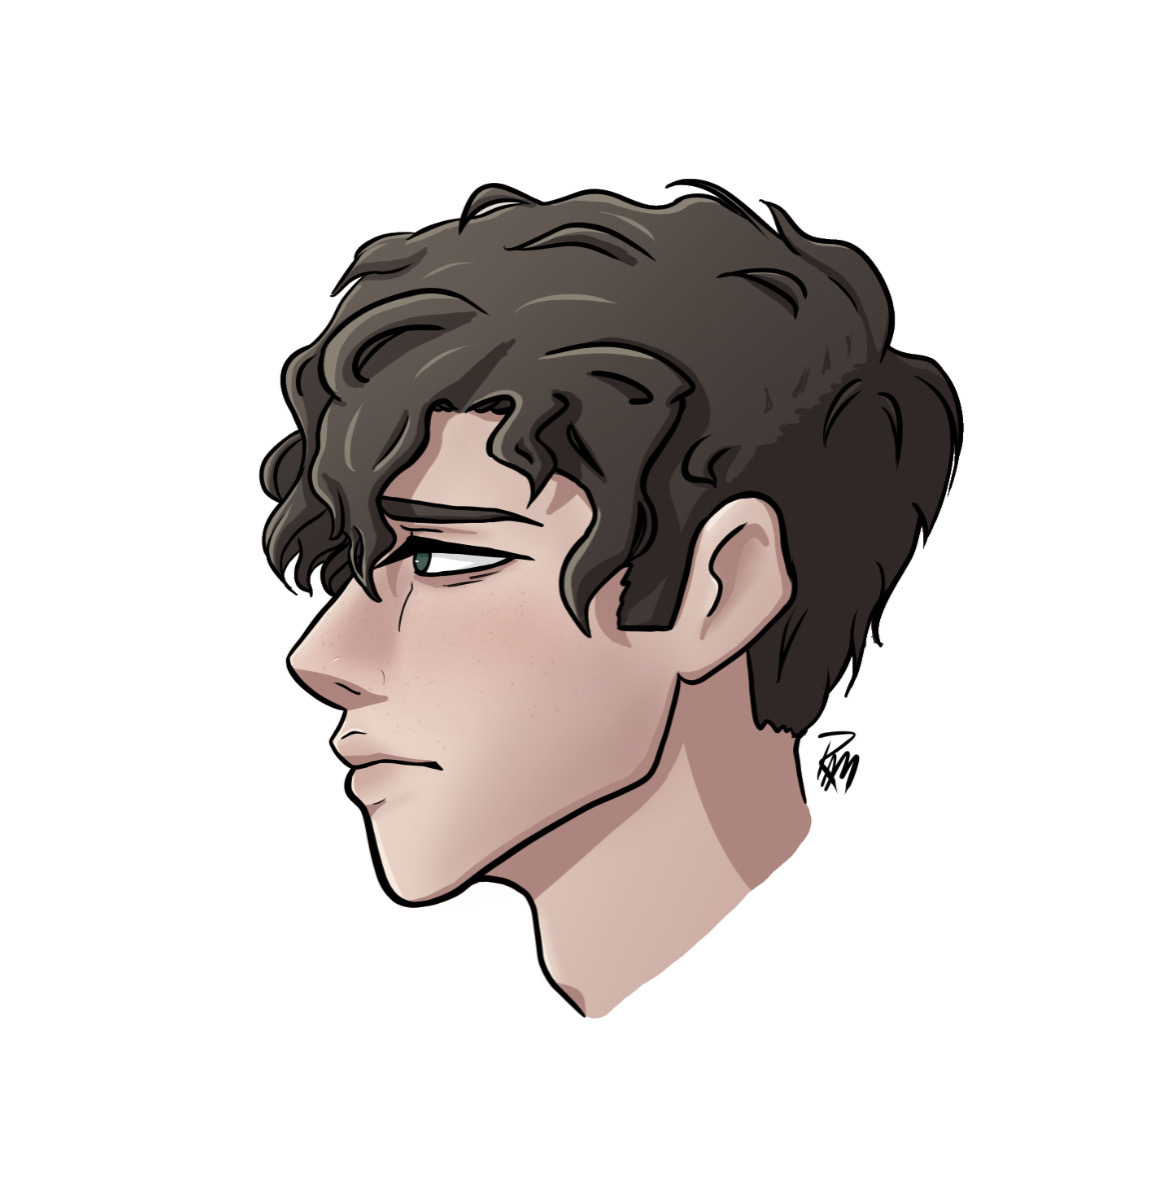 Anime boy with curly hair side view by MarianaMartins20 on DeviantArt